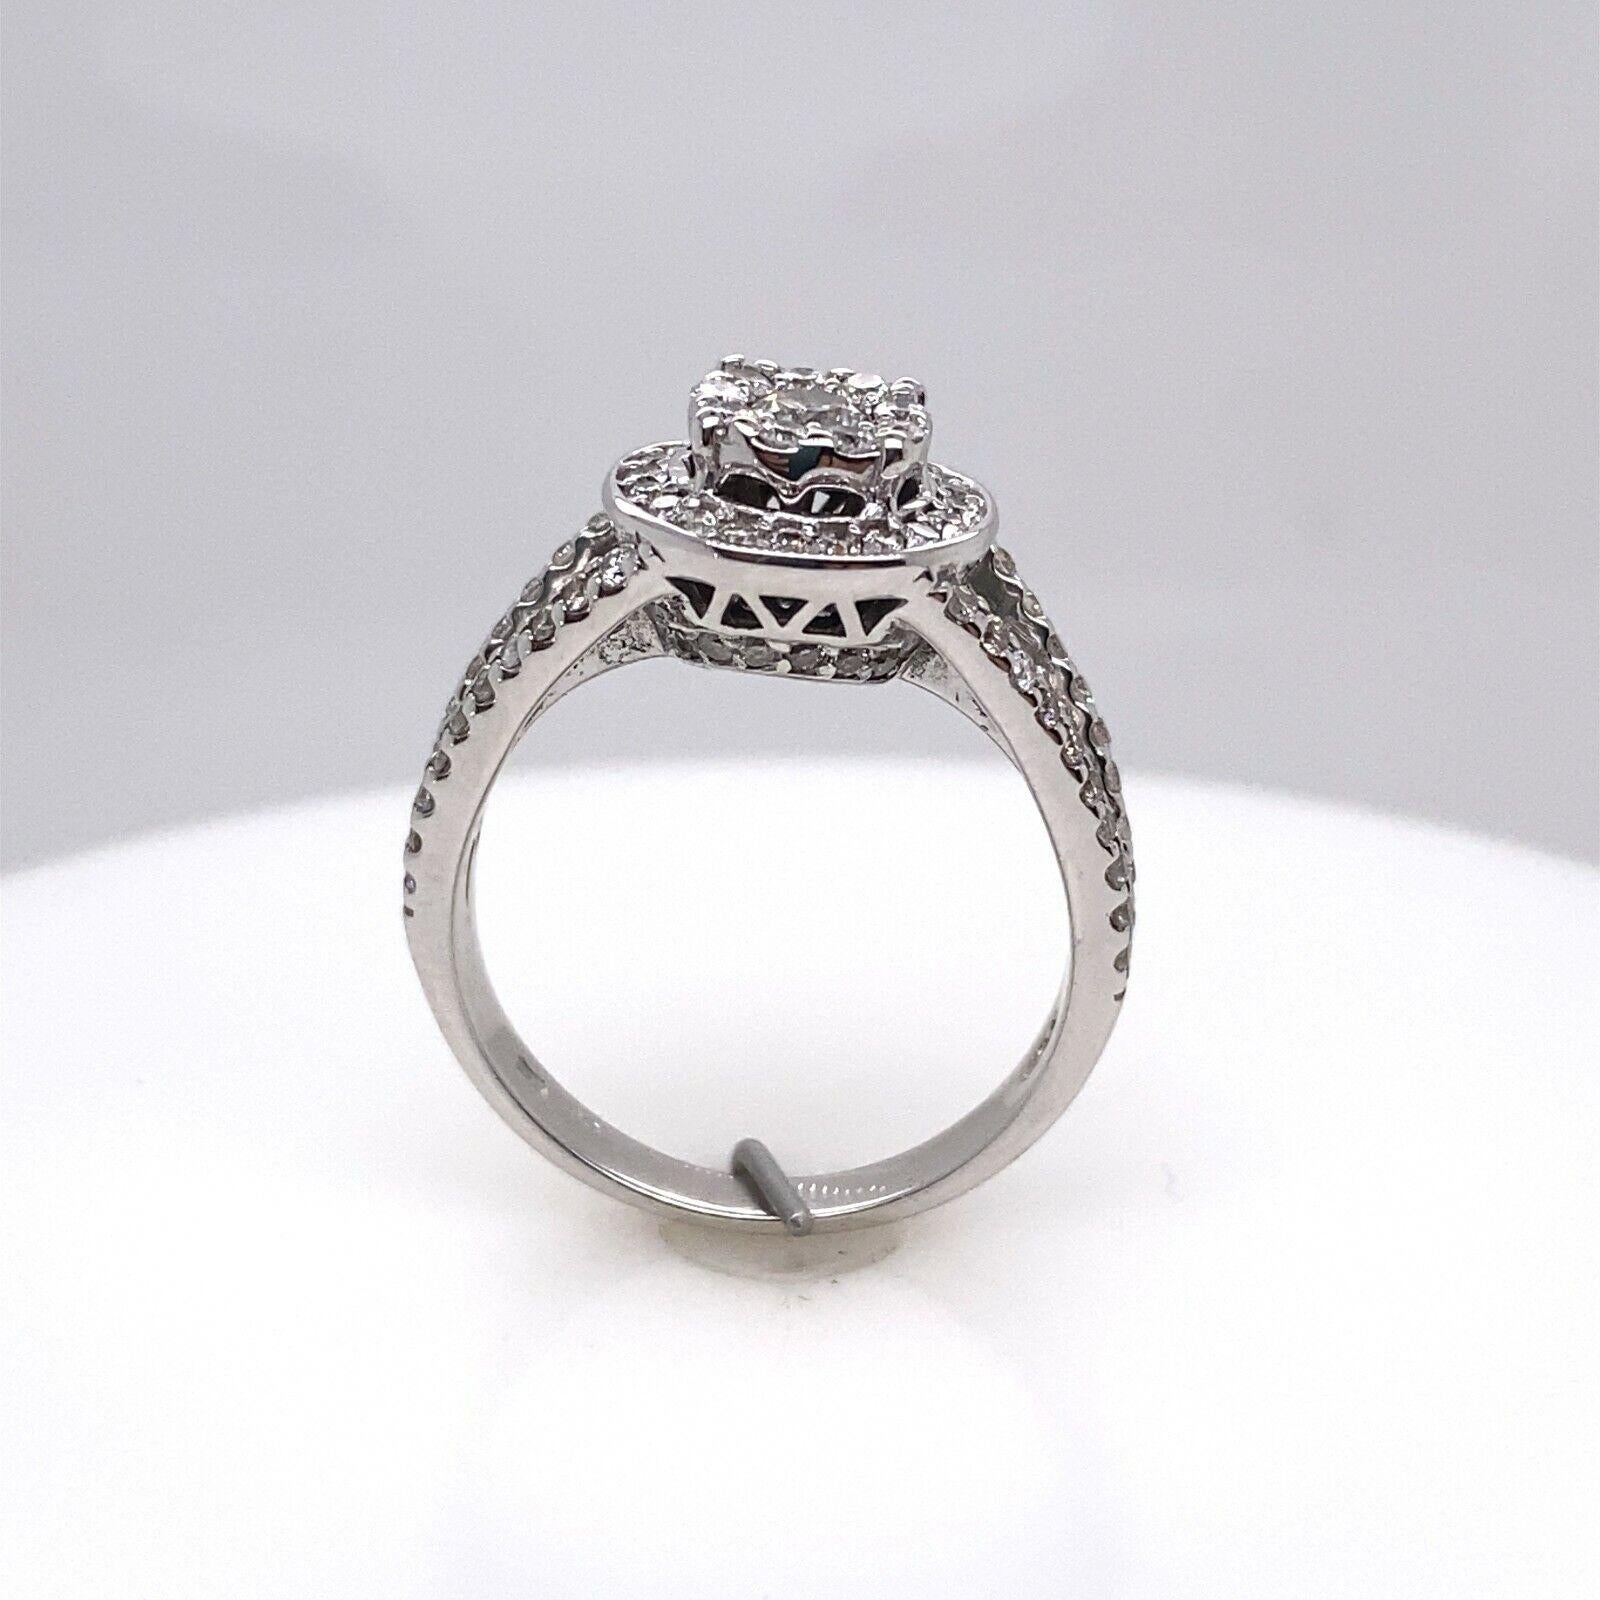 18ct White Gold Diamond Cluster Ring, Set With 0.75ct of Round Diamonds

Additional Information:
Total Diamond Weight: 0.75ct
Diamond Colour: G/H
Diamond Clarity: SI
Total Weight: 4.8g
Ring Size: K1/2
Width of Band: 3mm
Width of Head: 10mm
Length of